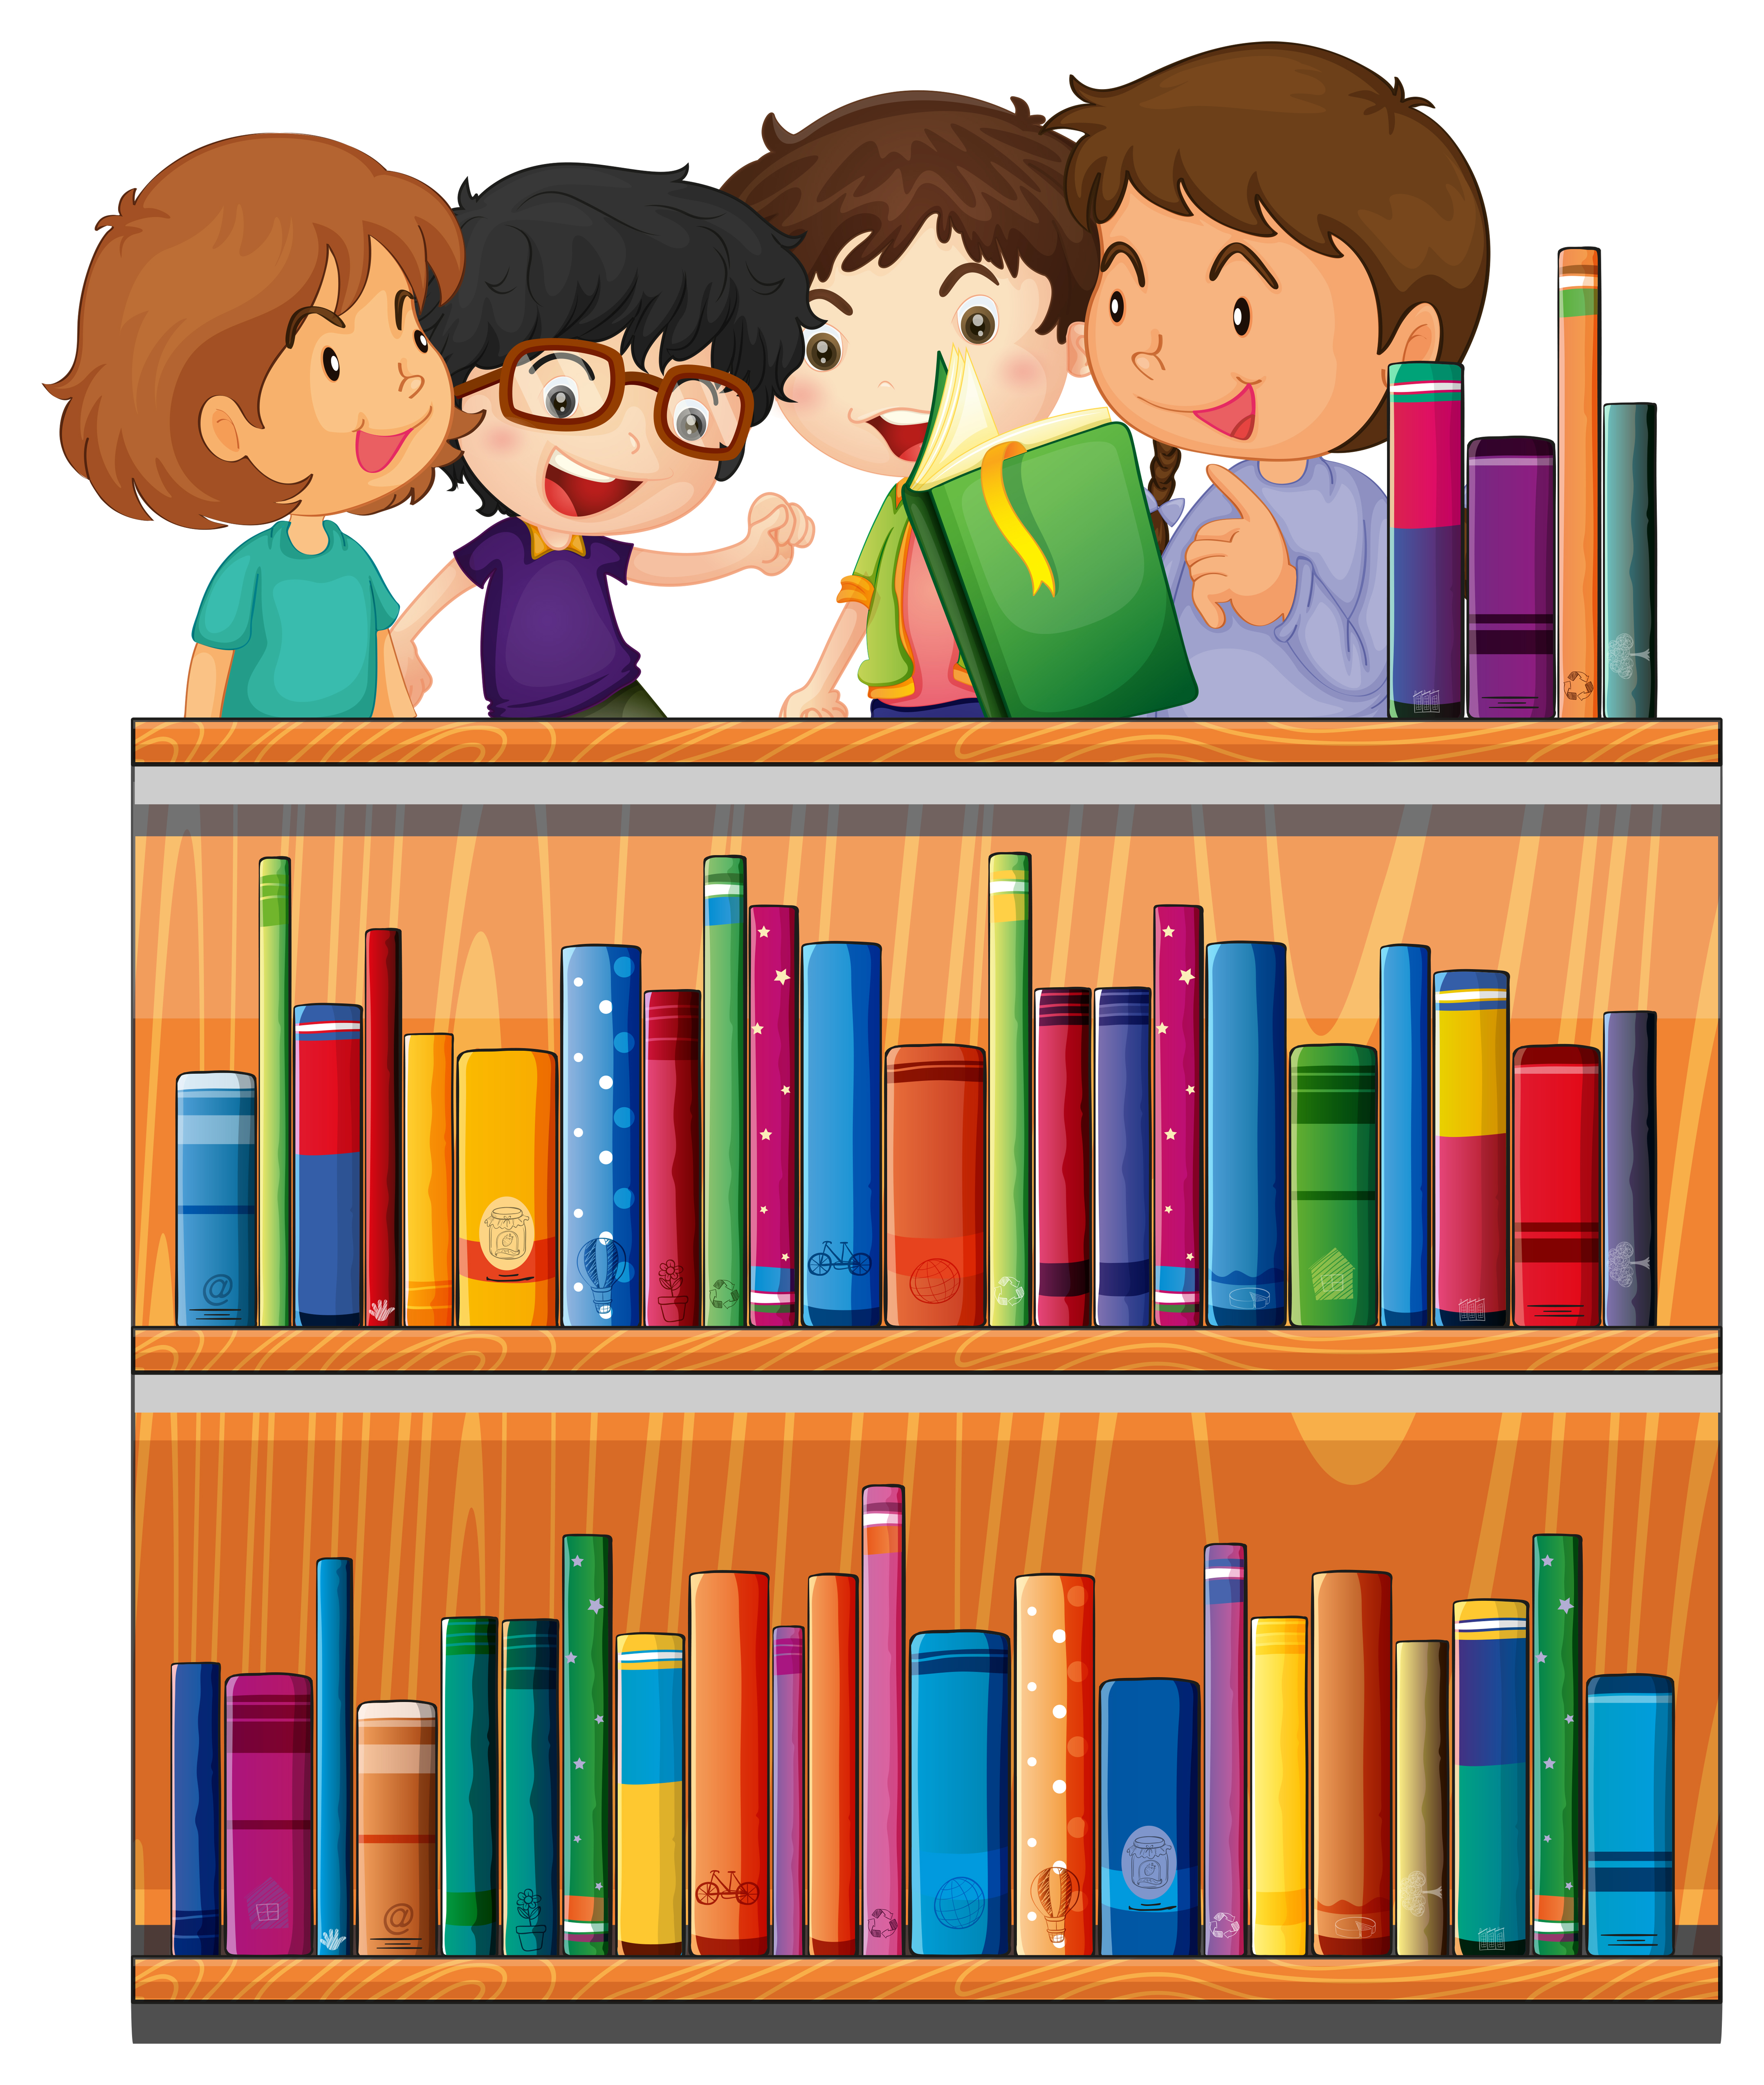 Download Children reading books in library 447901 - Download Free Vectors, Clipart Graphics & Vector Art